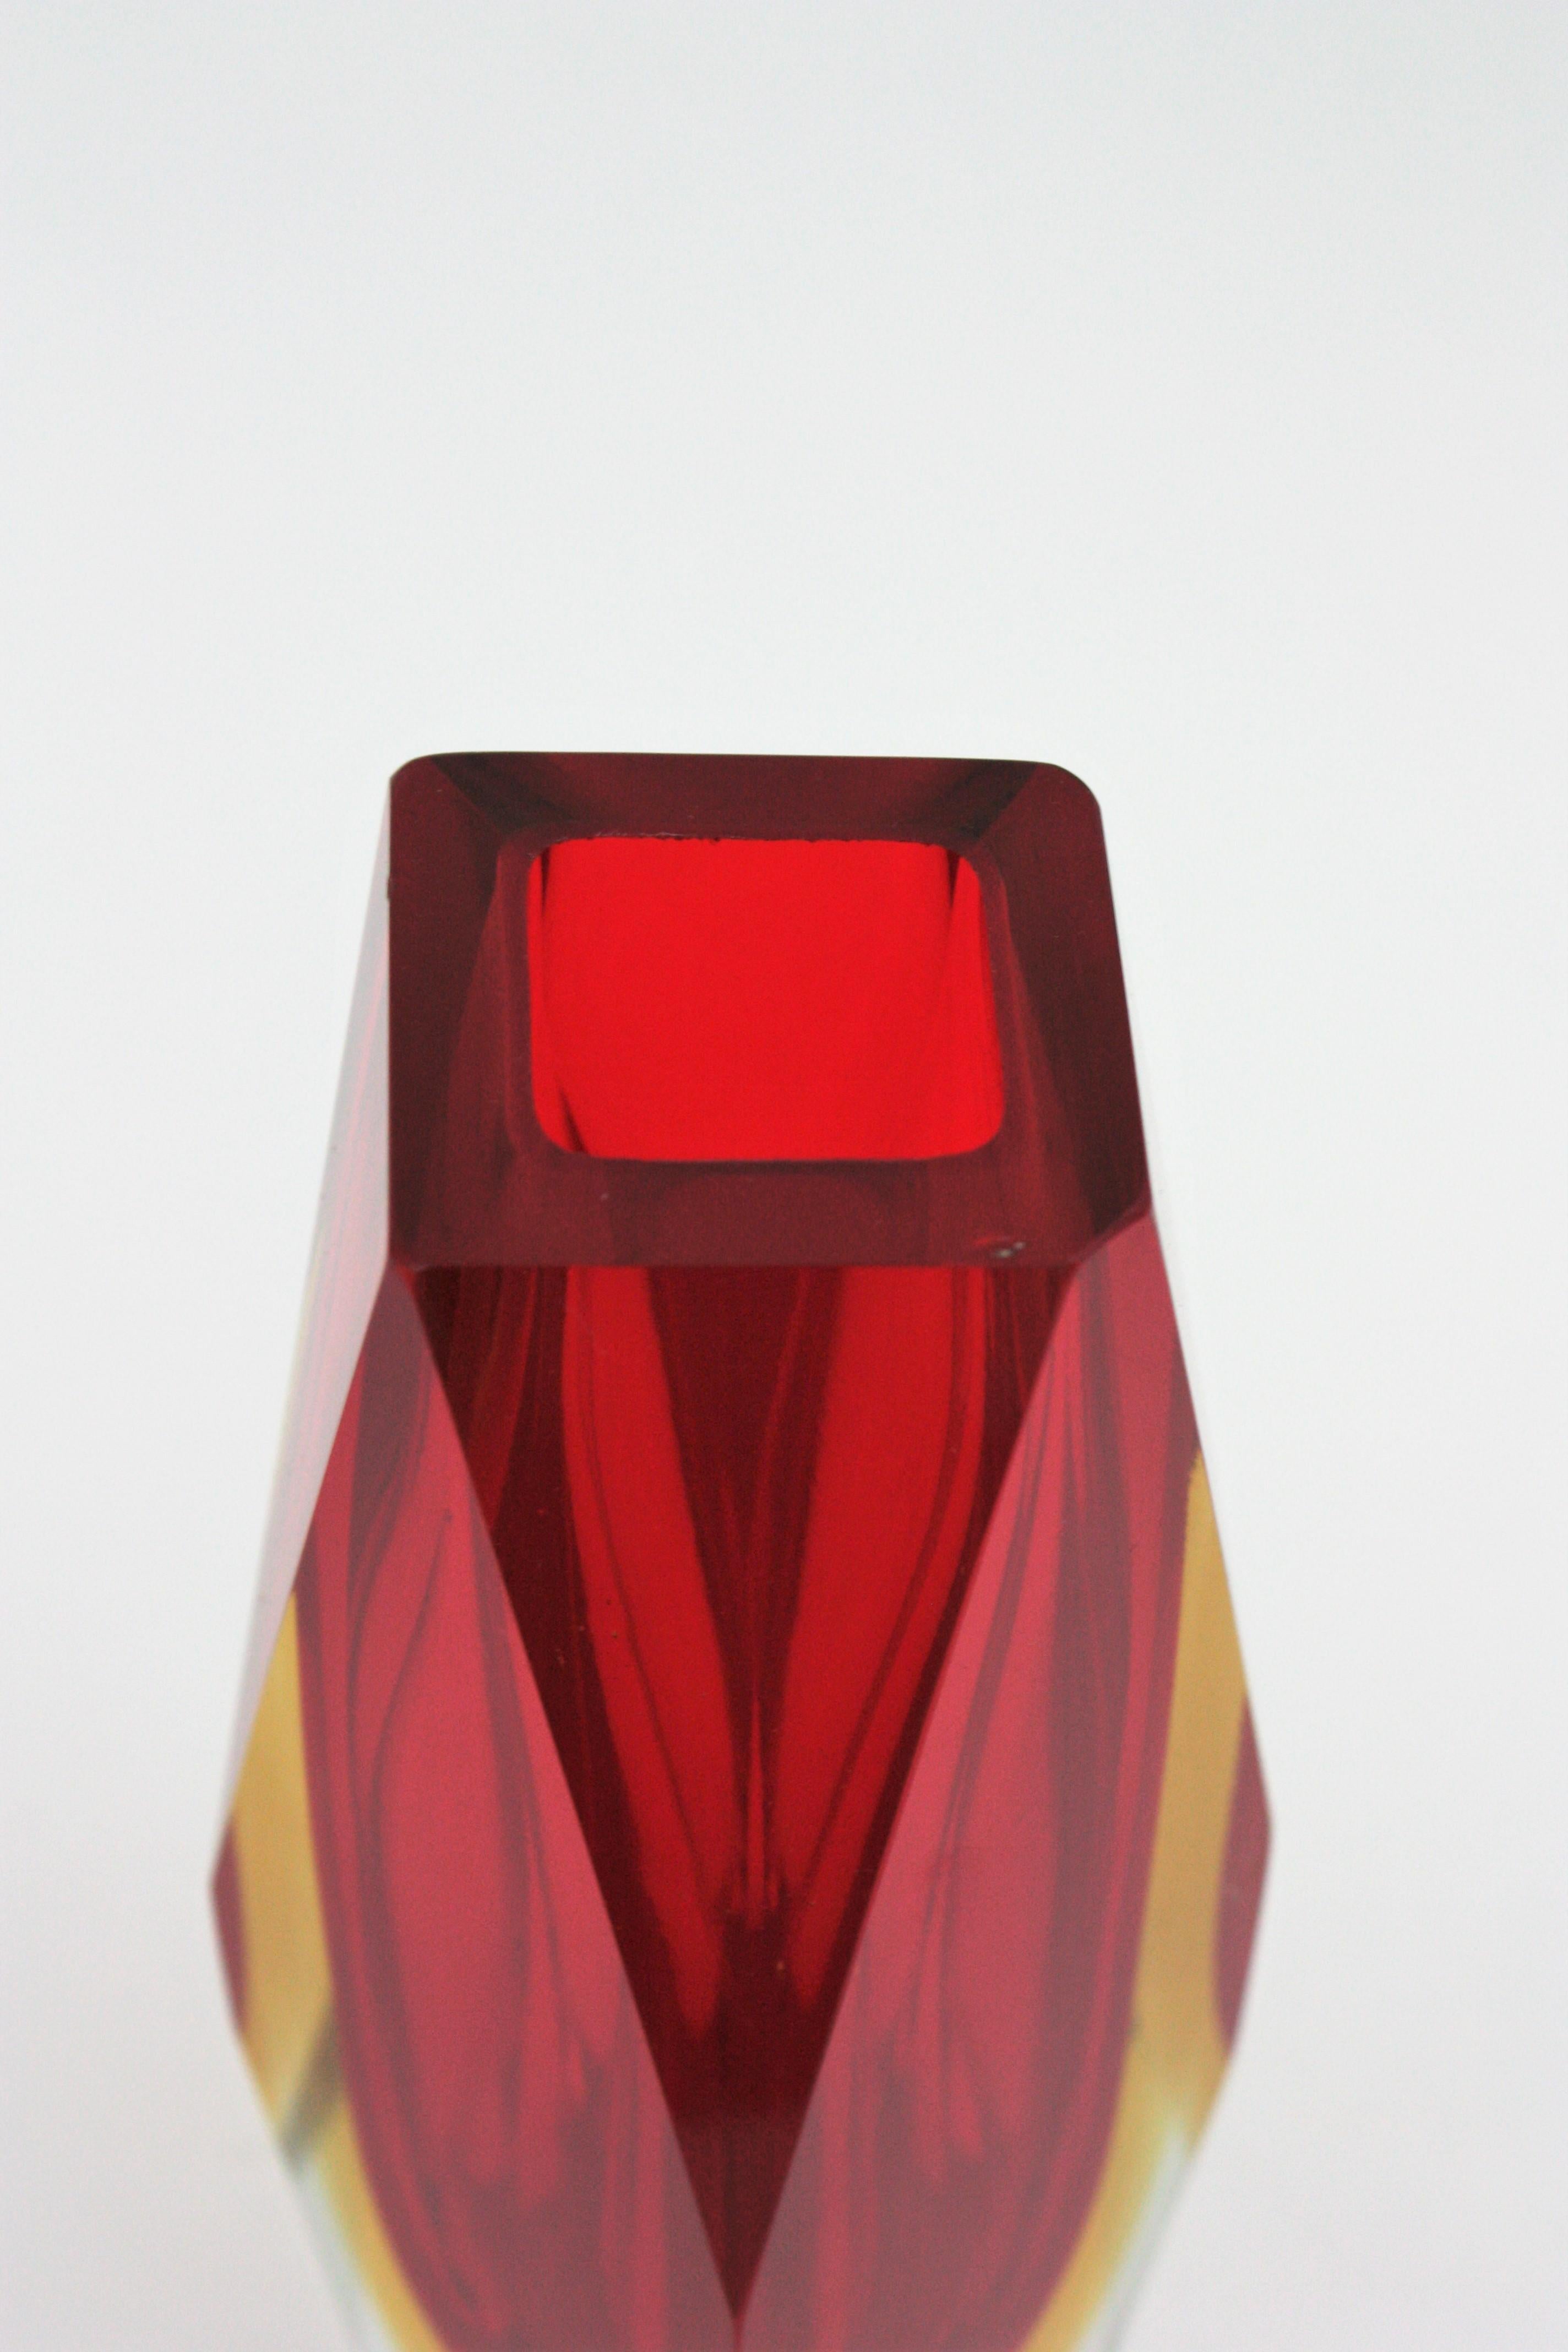 Huge Mandruzzato Murano Faceted Sommerso Red and Yellow Art Glass Vase 6